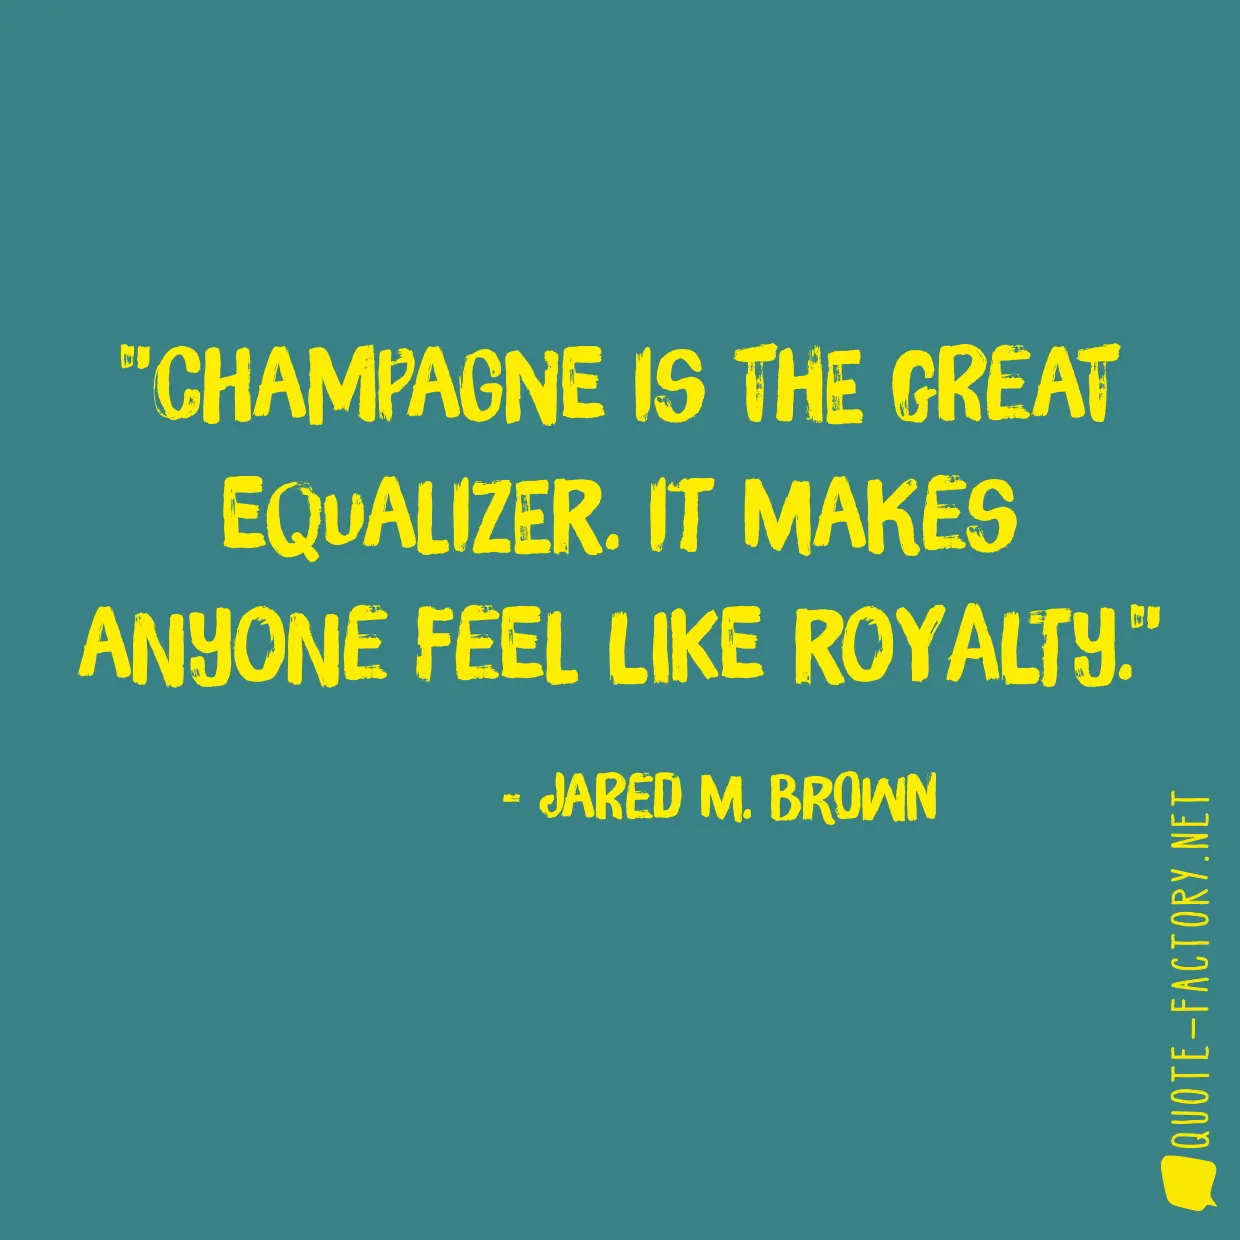 Champagne is the great equalizer. It makes anyone feel like royalty.